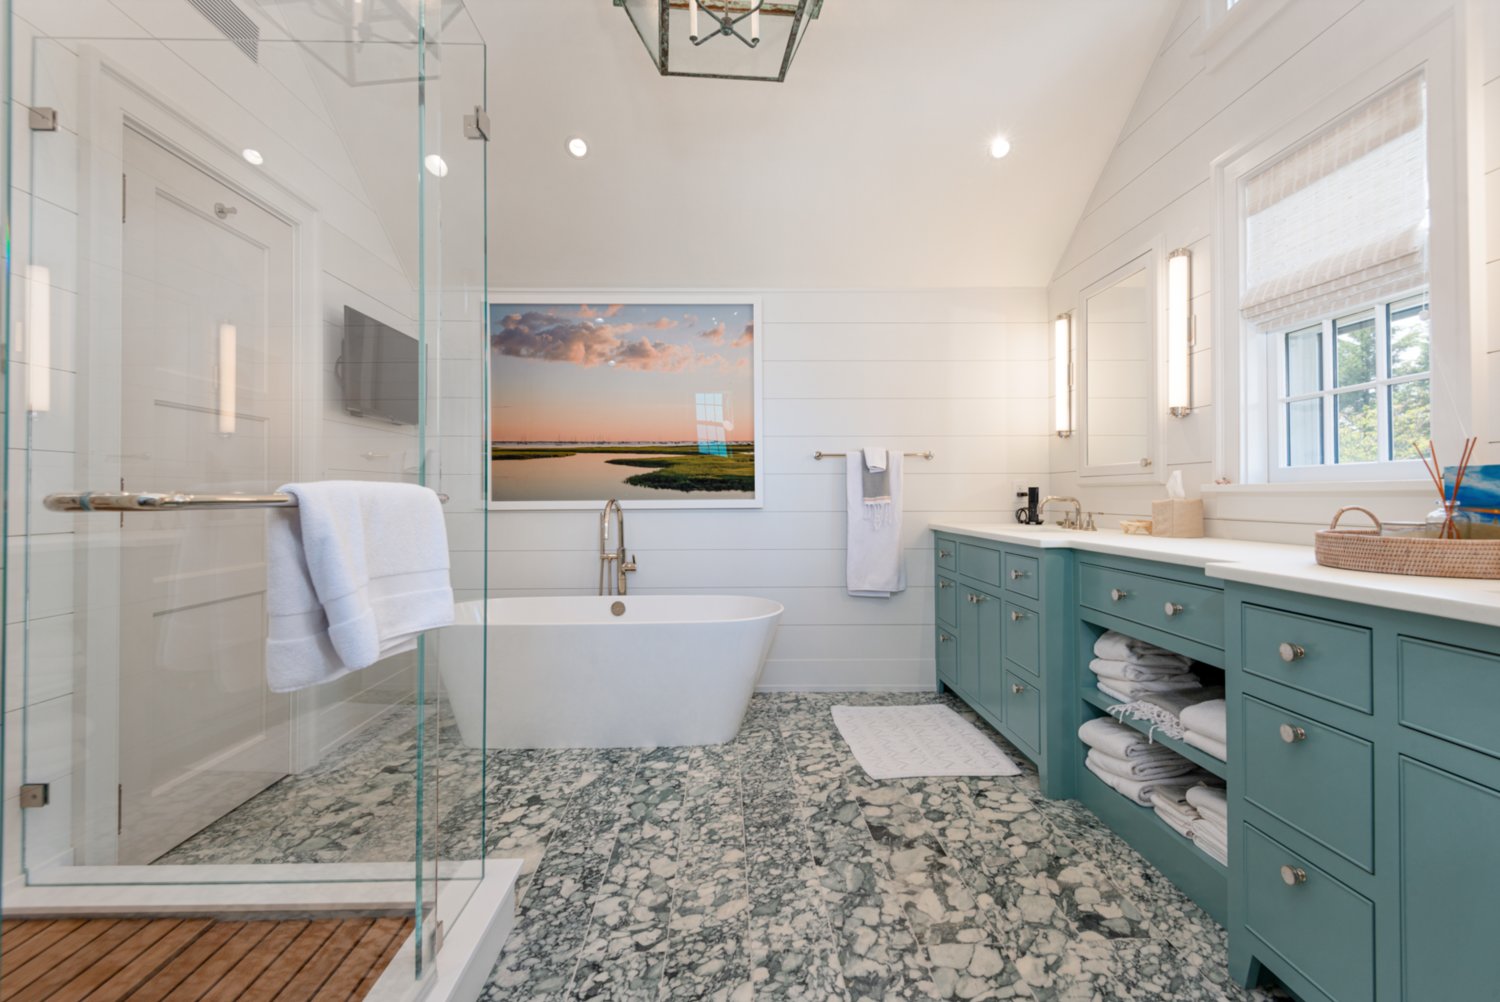 The master bath has a soaking tub and glass-enclosed shower.